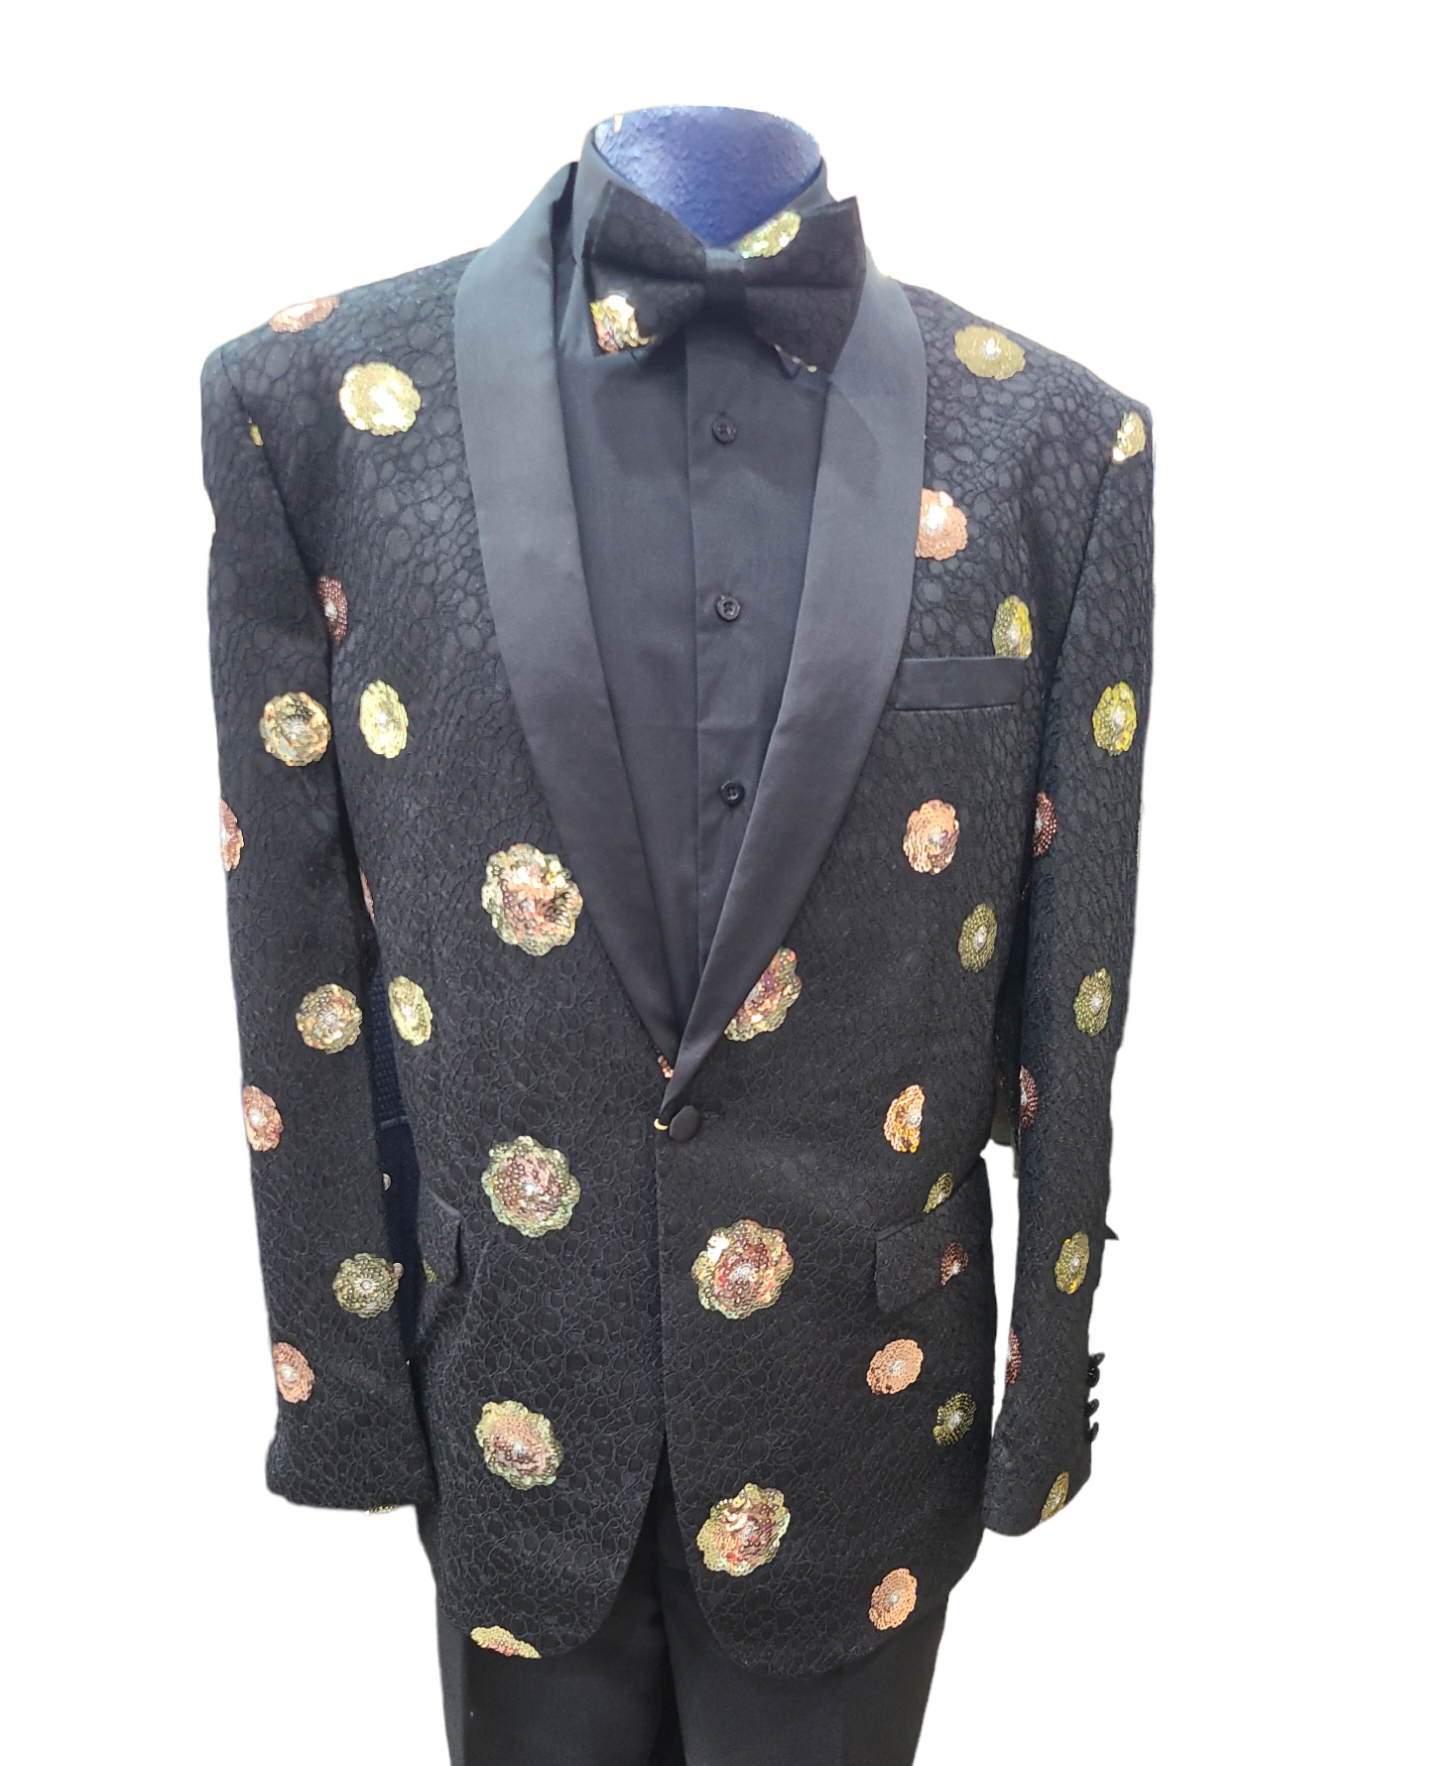 Gianni Sport jacket with matching Bow Tie